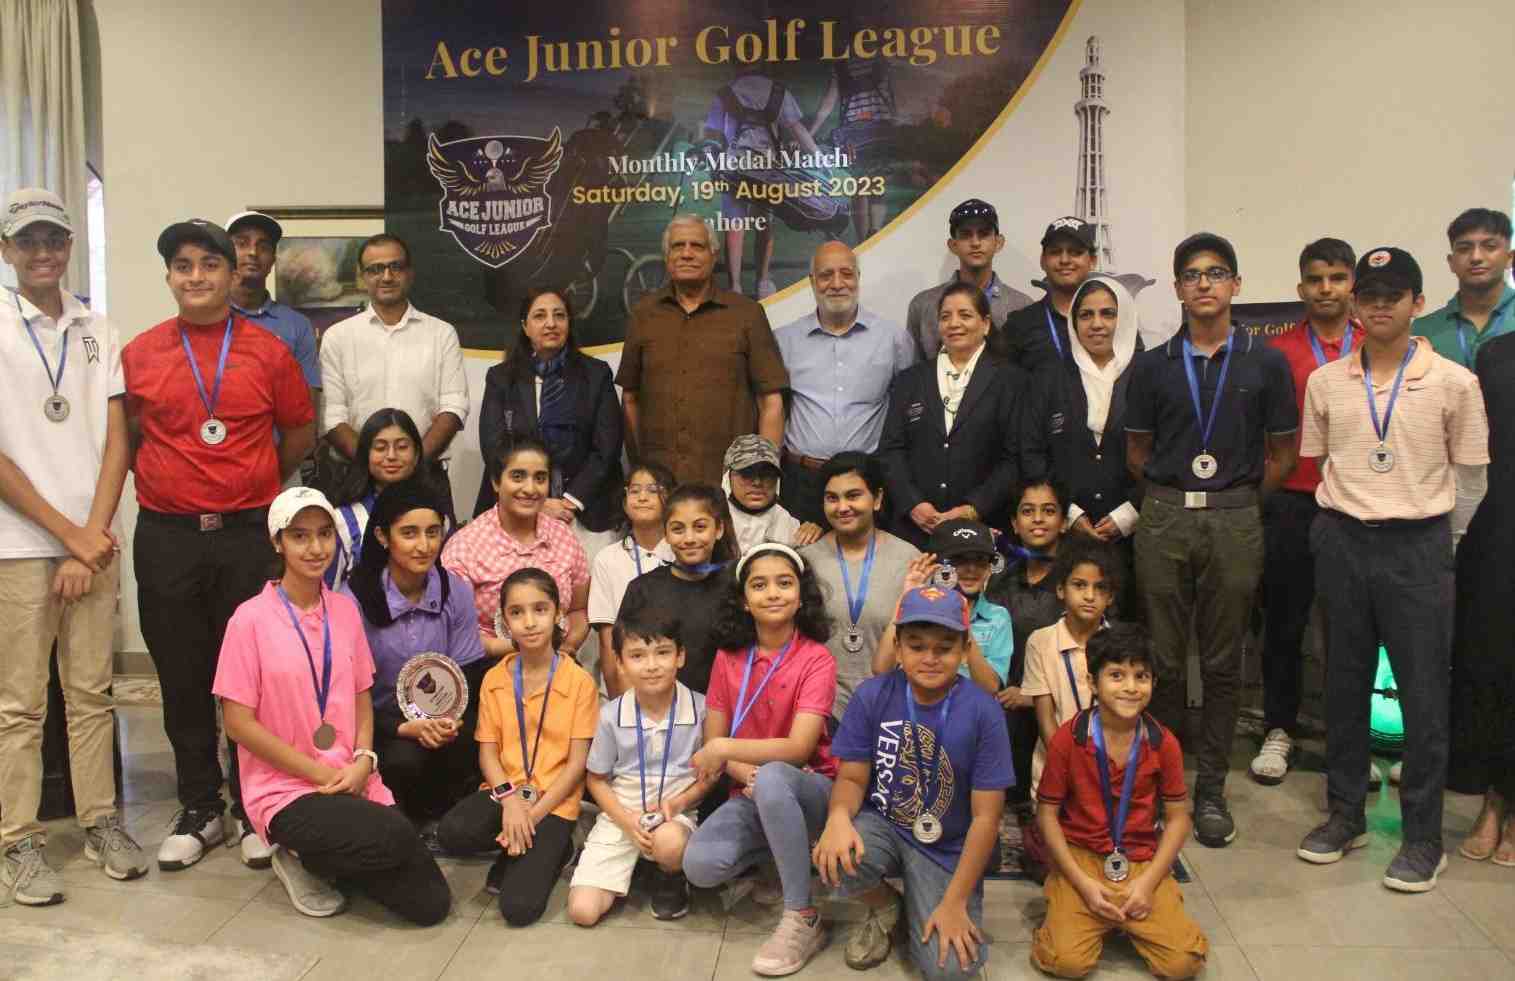 Golf News: AJGL Monthly Medal Match concludes on a high note